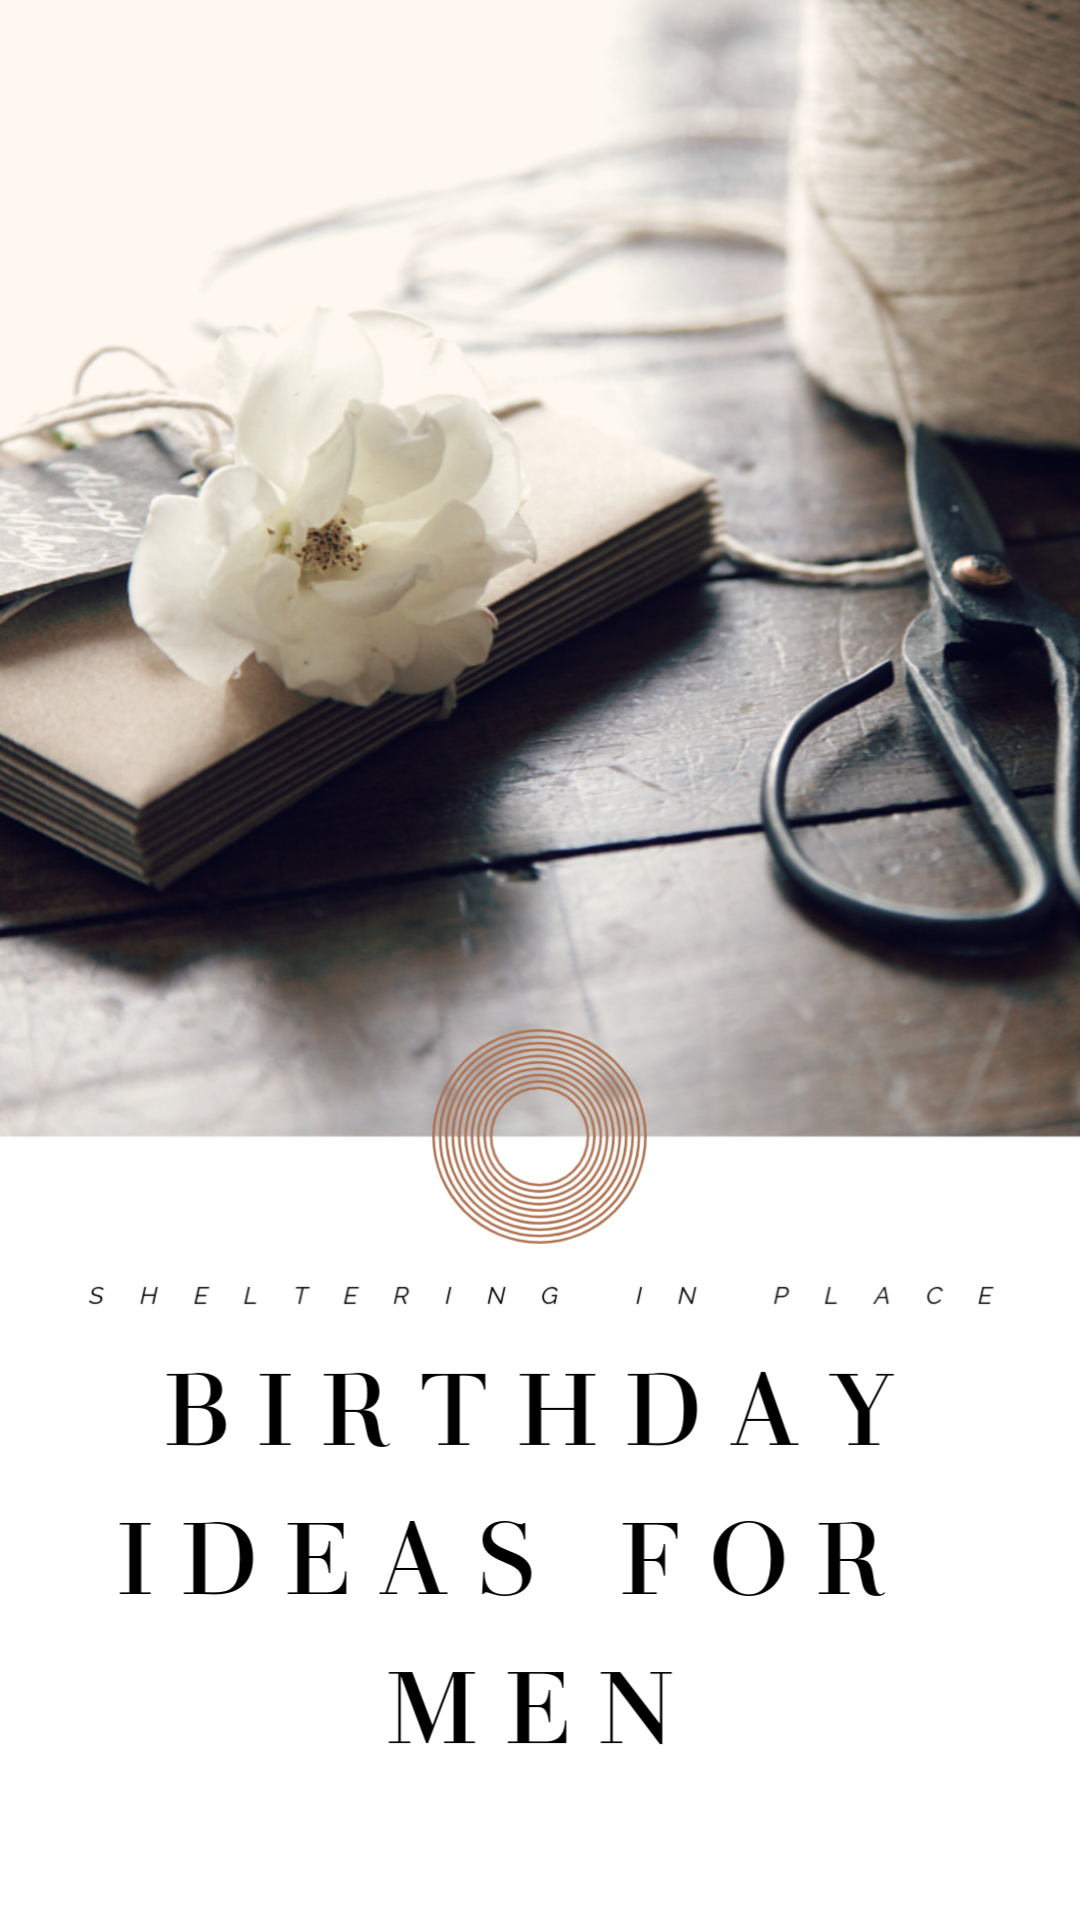 How To Make Birthdays Special for Men During Sheltering In Place